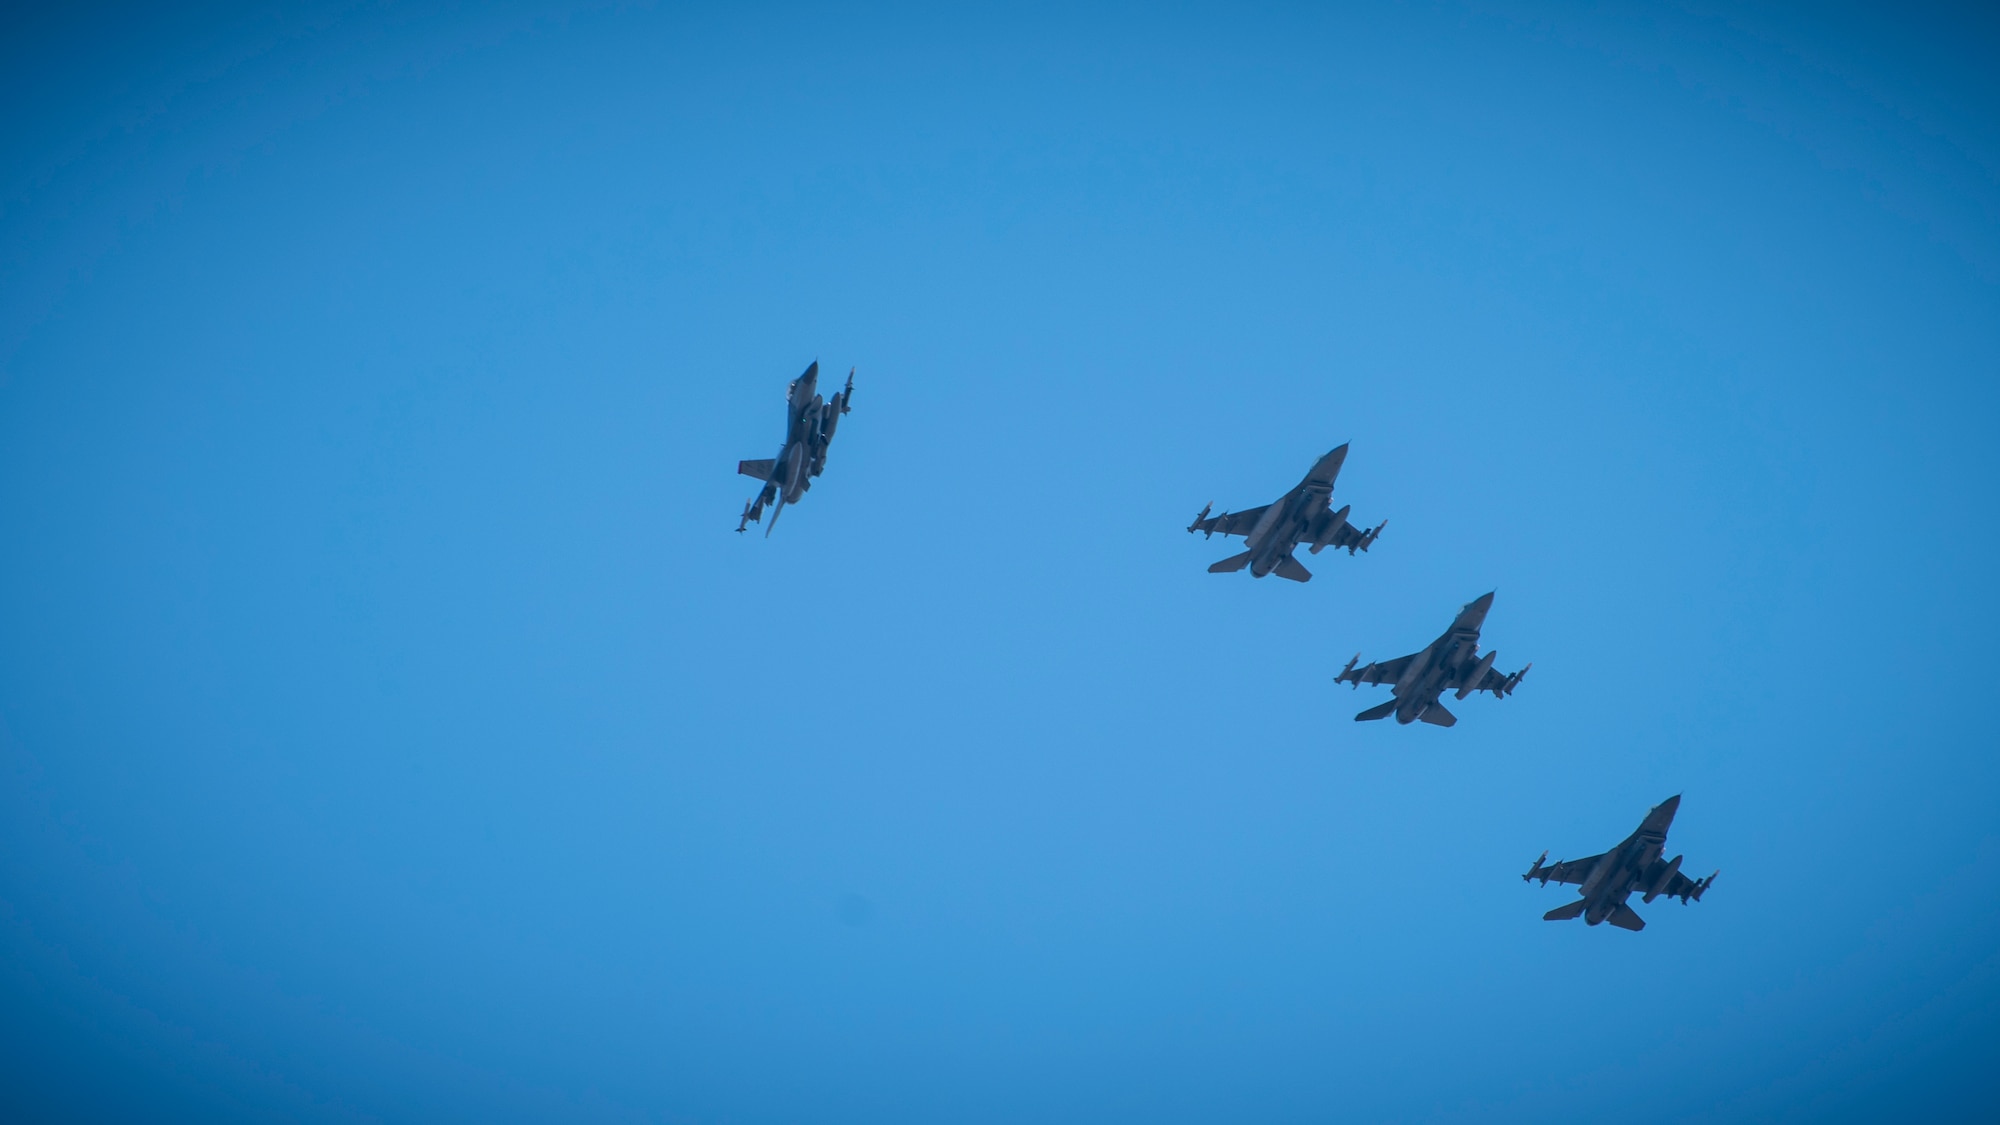 Four U.S. Air Force F-16 Fighting Falcons fly in formation at Misawa Air Base, Japan, March 30, 2020. In an air combat role, the F-16's maneuverability and combat radius exceeds all potential threat fighter aircraft. It can locate targets in all weather conditions and detect low-flying aircraft in radar ground clutter. (U.S. Air Force photo by Airman 1st Class China M. Shock)